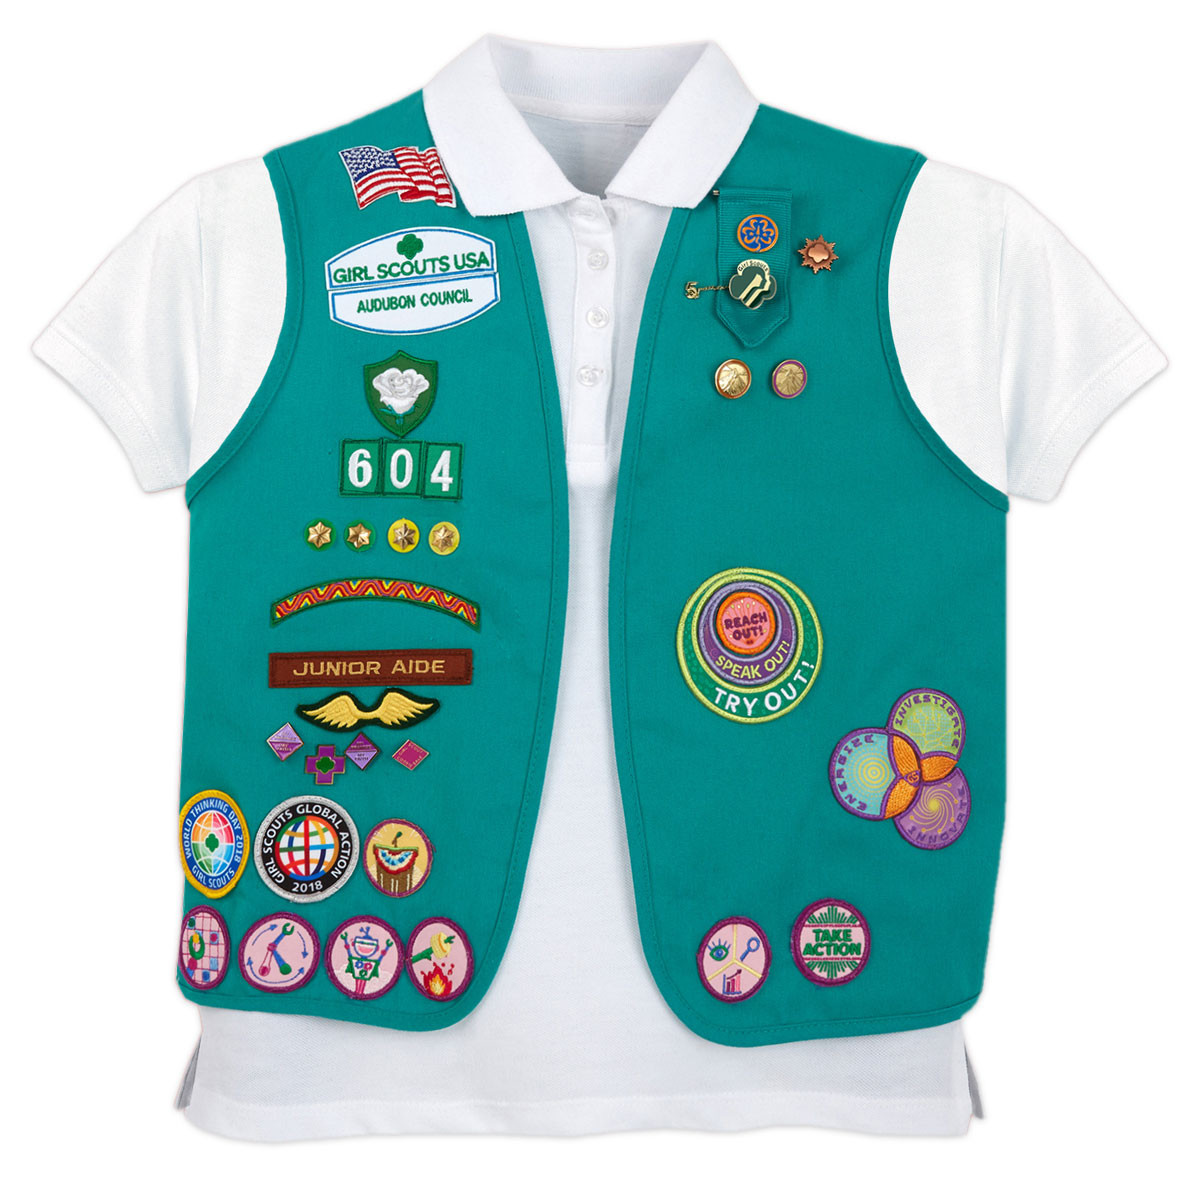 girl scout council of america free xxx photo